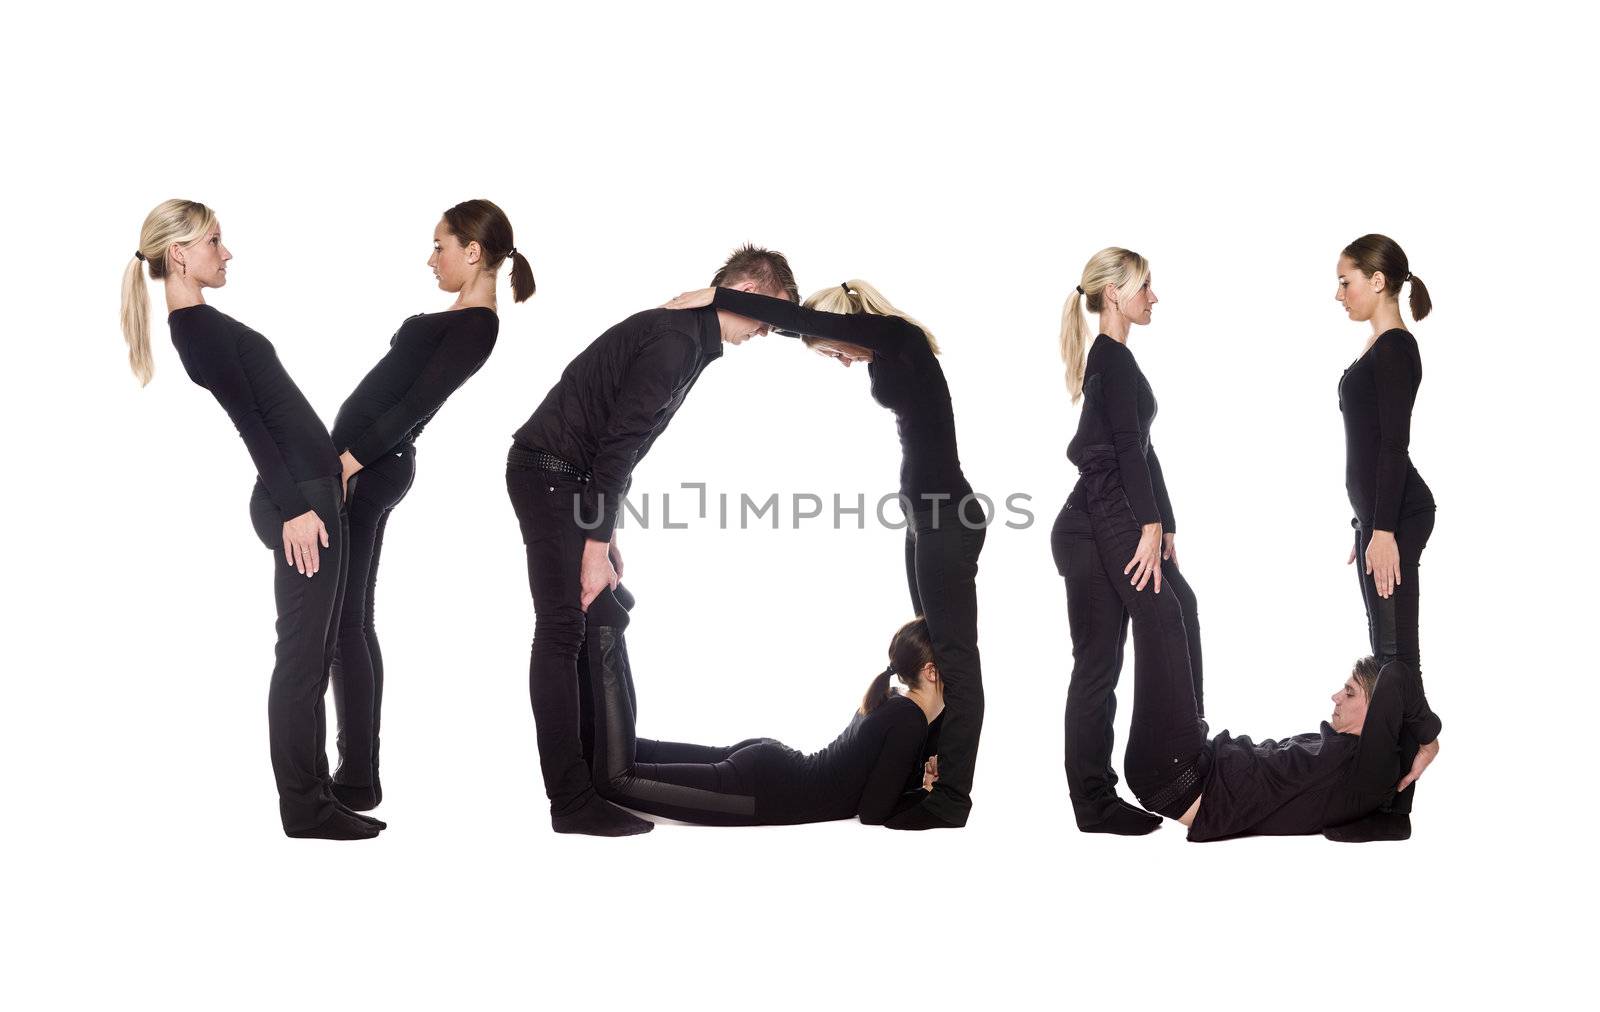 Group of people forming the word 'YOU', isolated on white background.